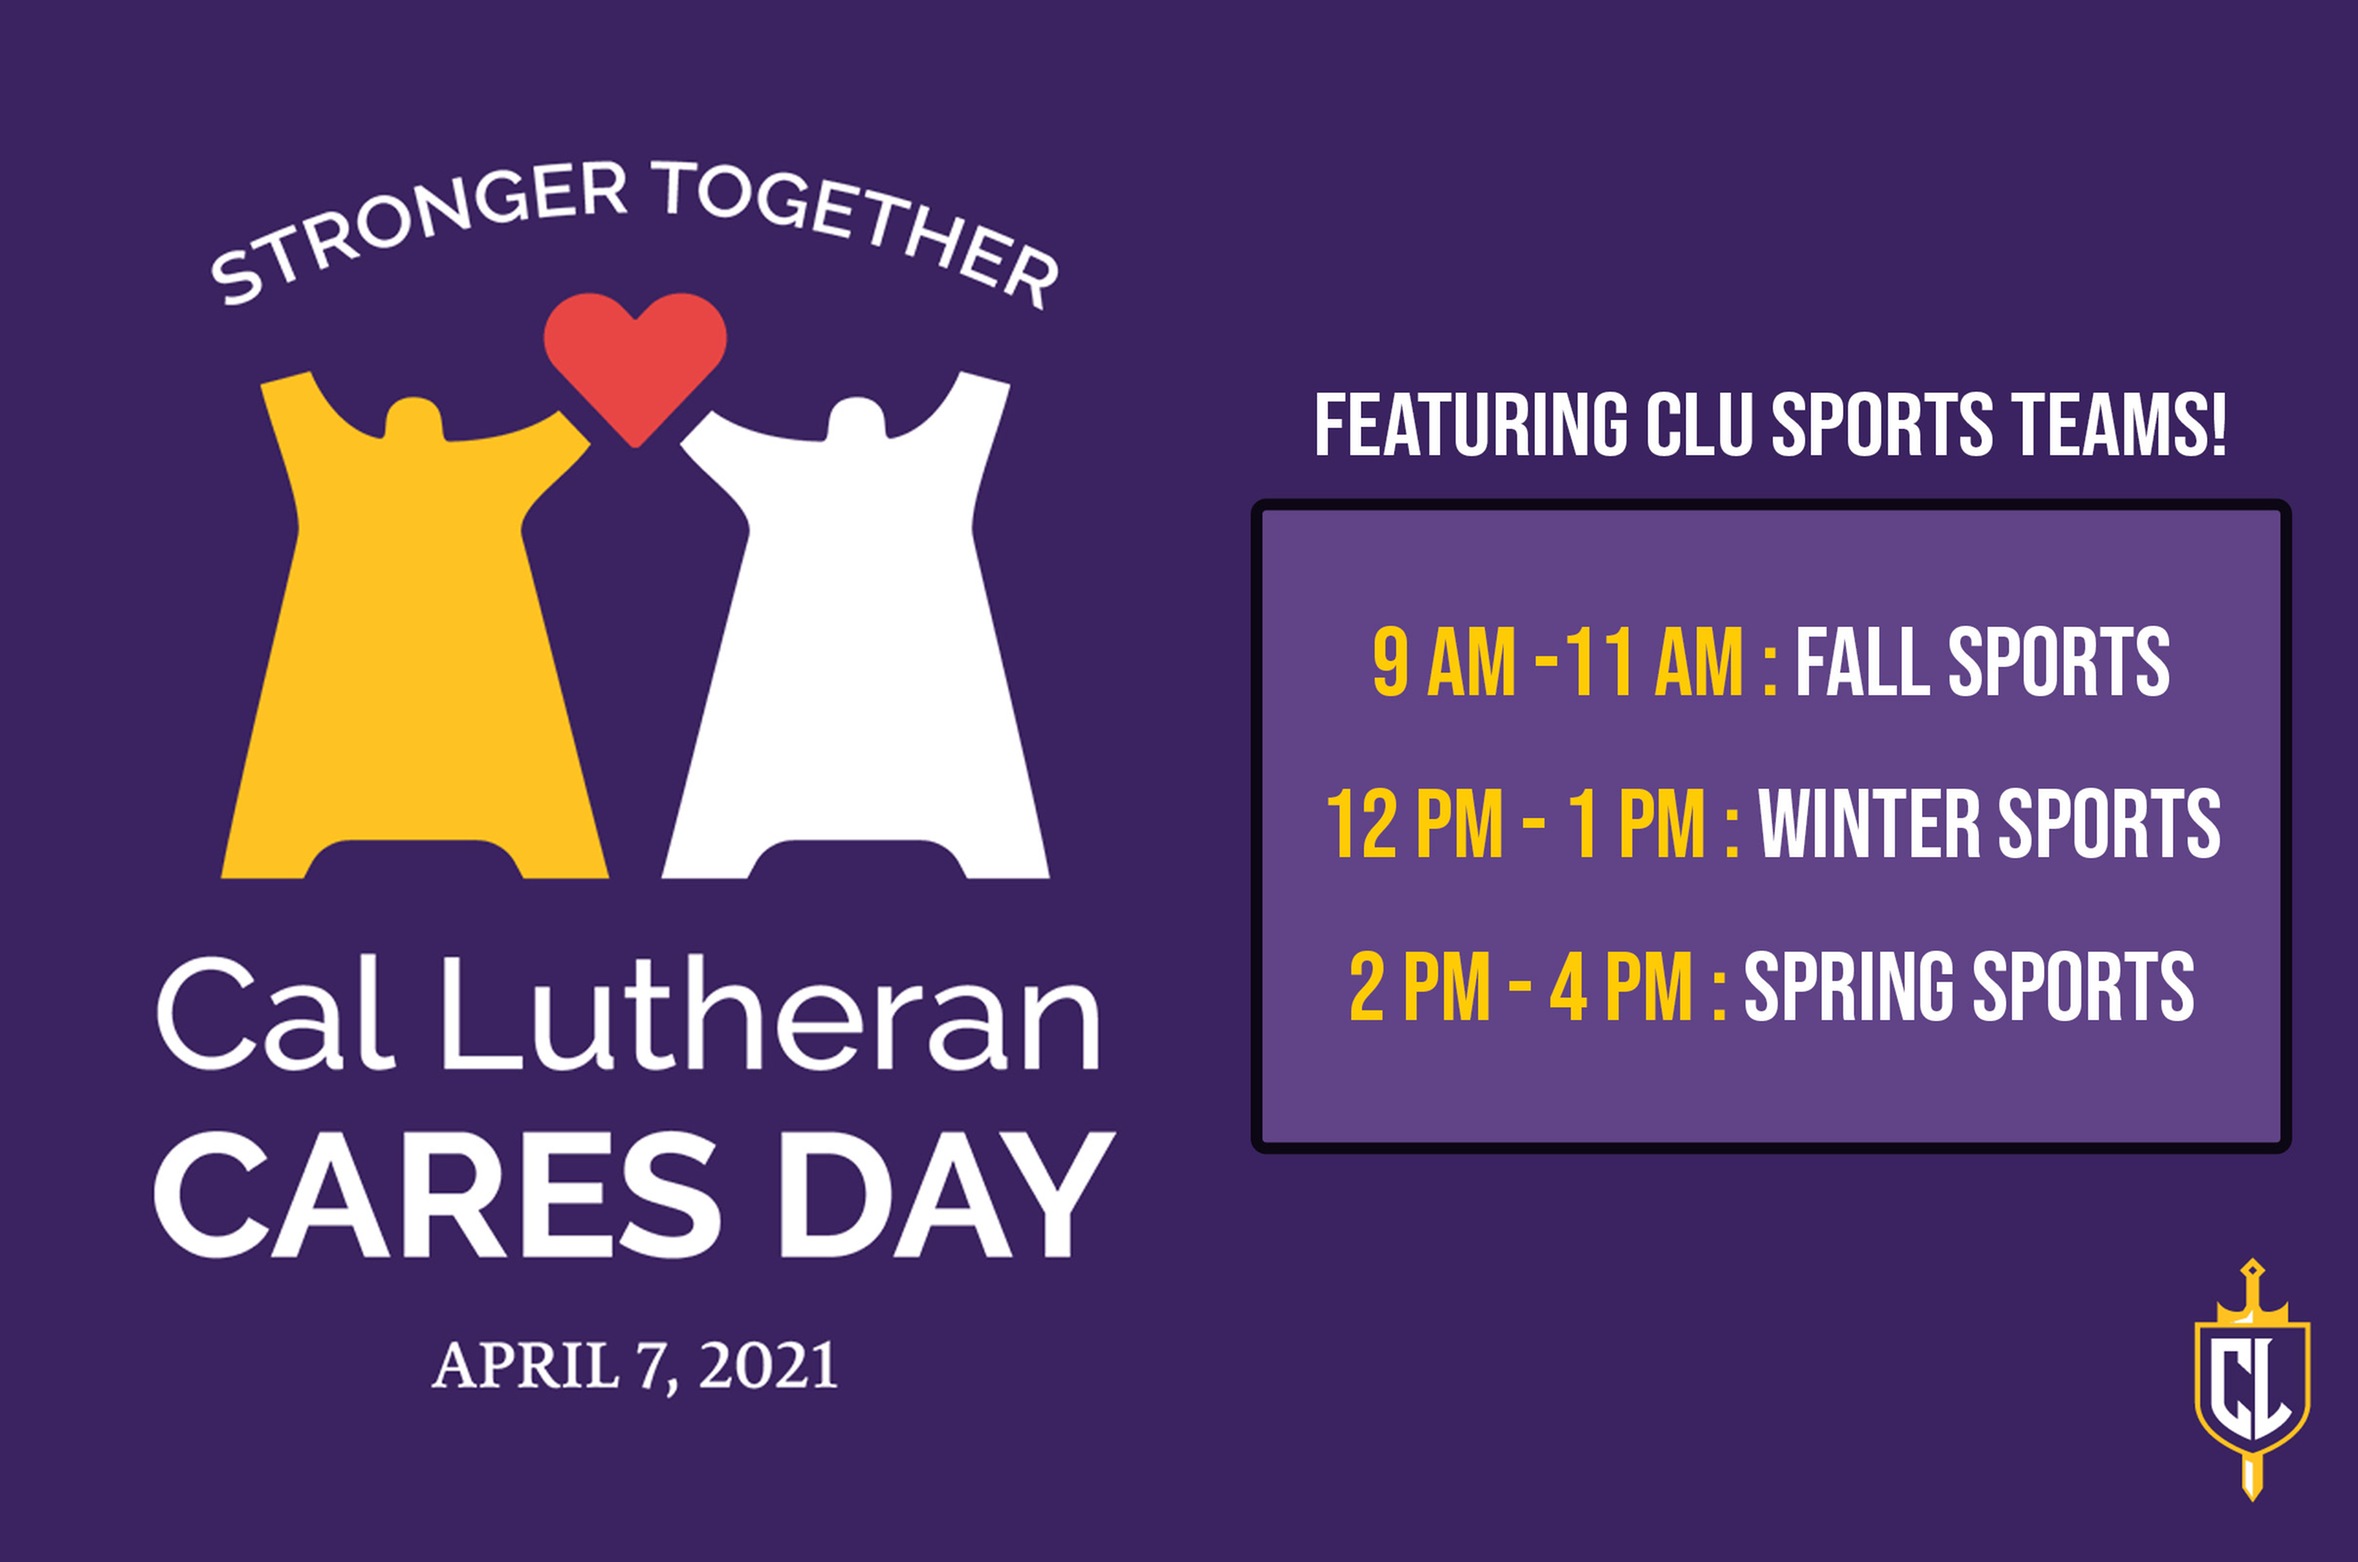 Cal Lutheran Cares Day: Stronger Together